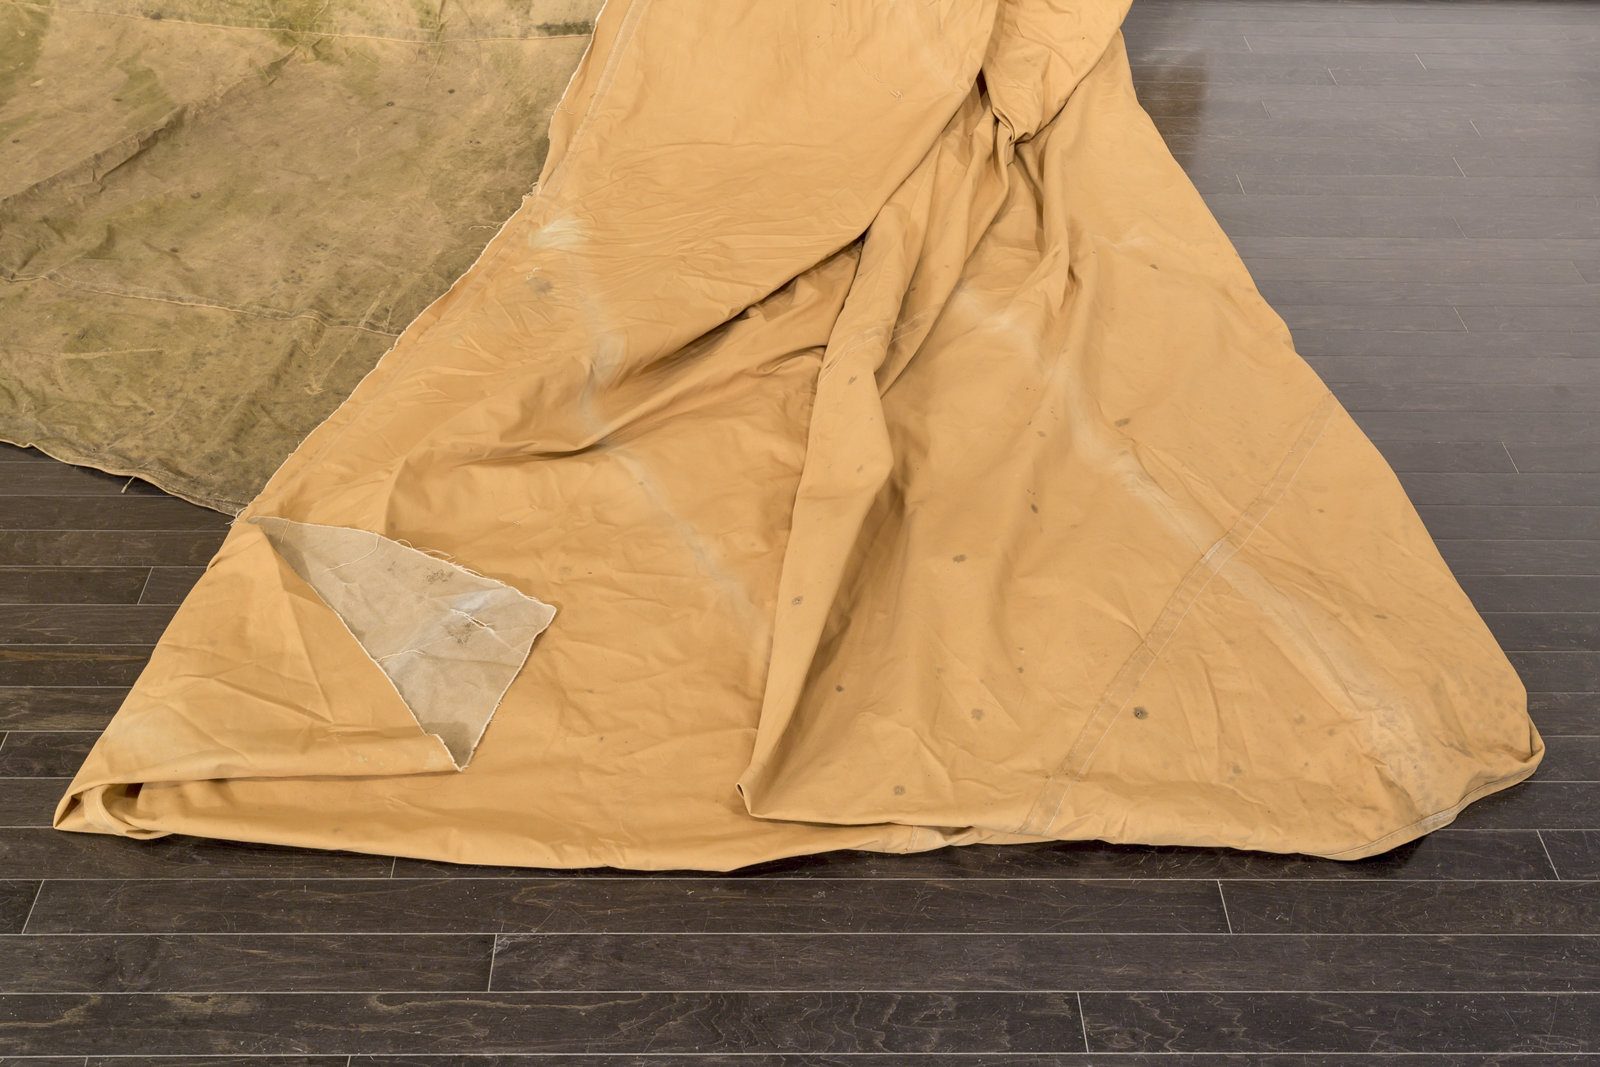 Duane Linklater, a gift from Doreen (detail), 2016, tipi canvas, nails, dimensions variable. Installation view, A Parallel Excavation, Art Gallery of Alberta, Edmonton, Canada, 2016